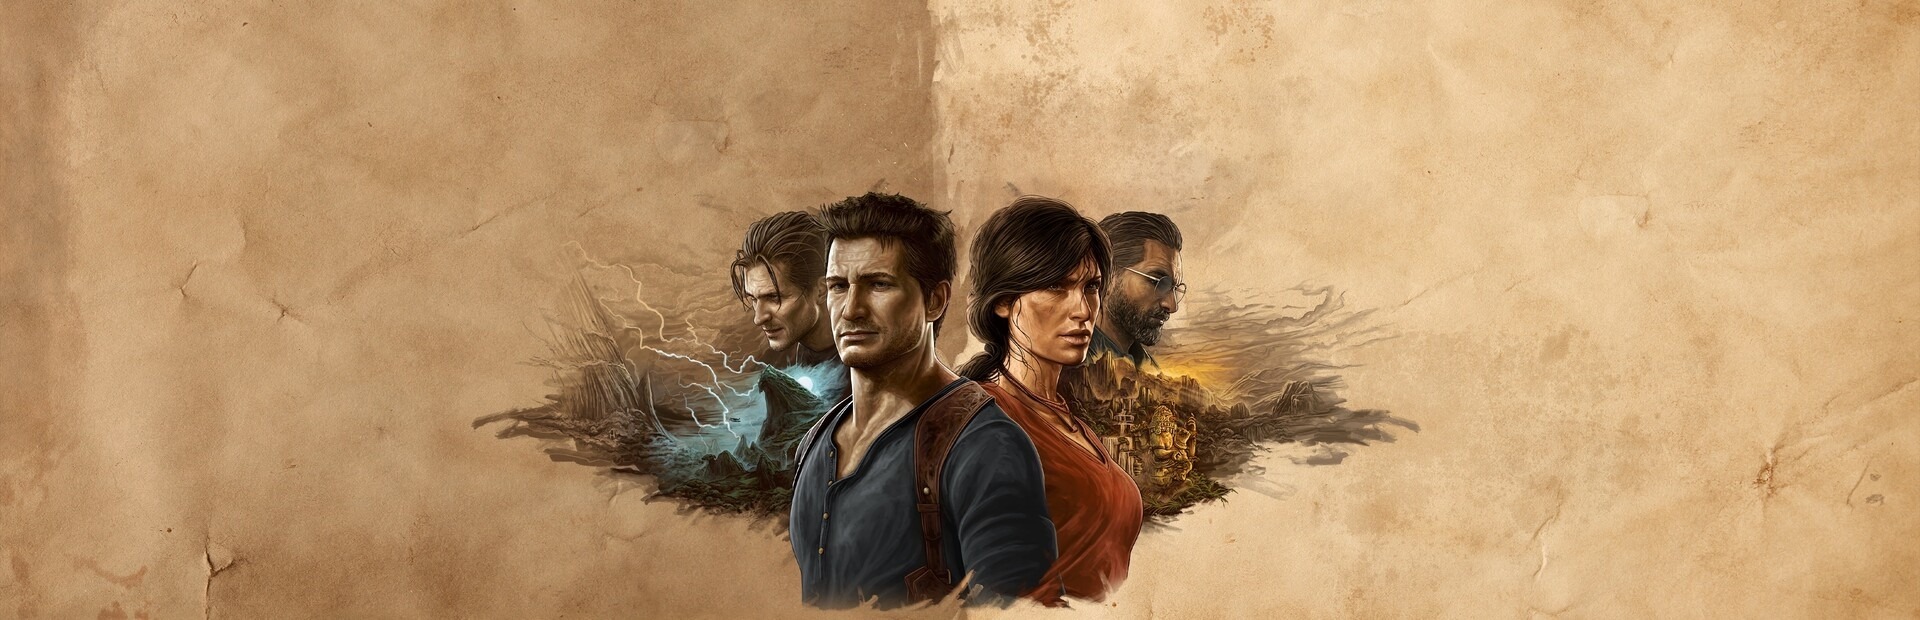 Legacy of thieves collection купить. Uncharted: Legacy of Thieves collection. Uncharted: Legacy of Thieves collection обложка. Uncharted Legacy of Thieves collection системные требования. Uncharted: Legacy of Thieves collection Iron Galaxy Studios.